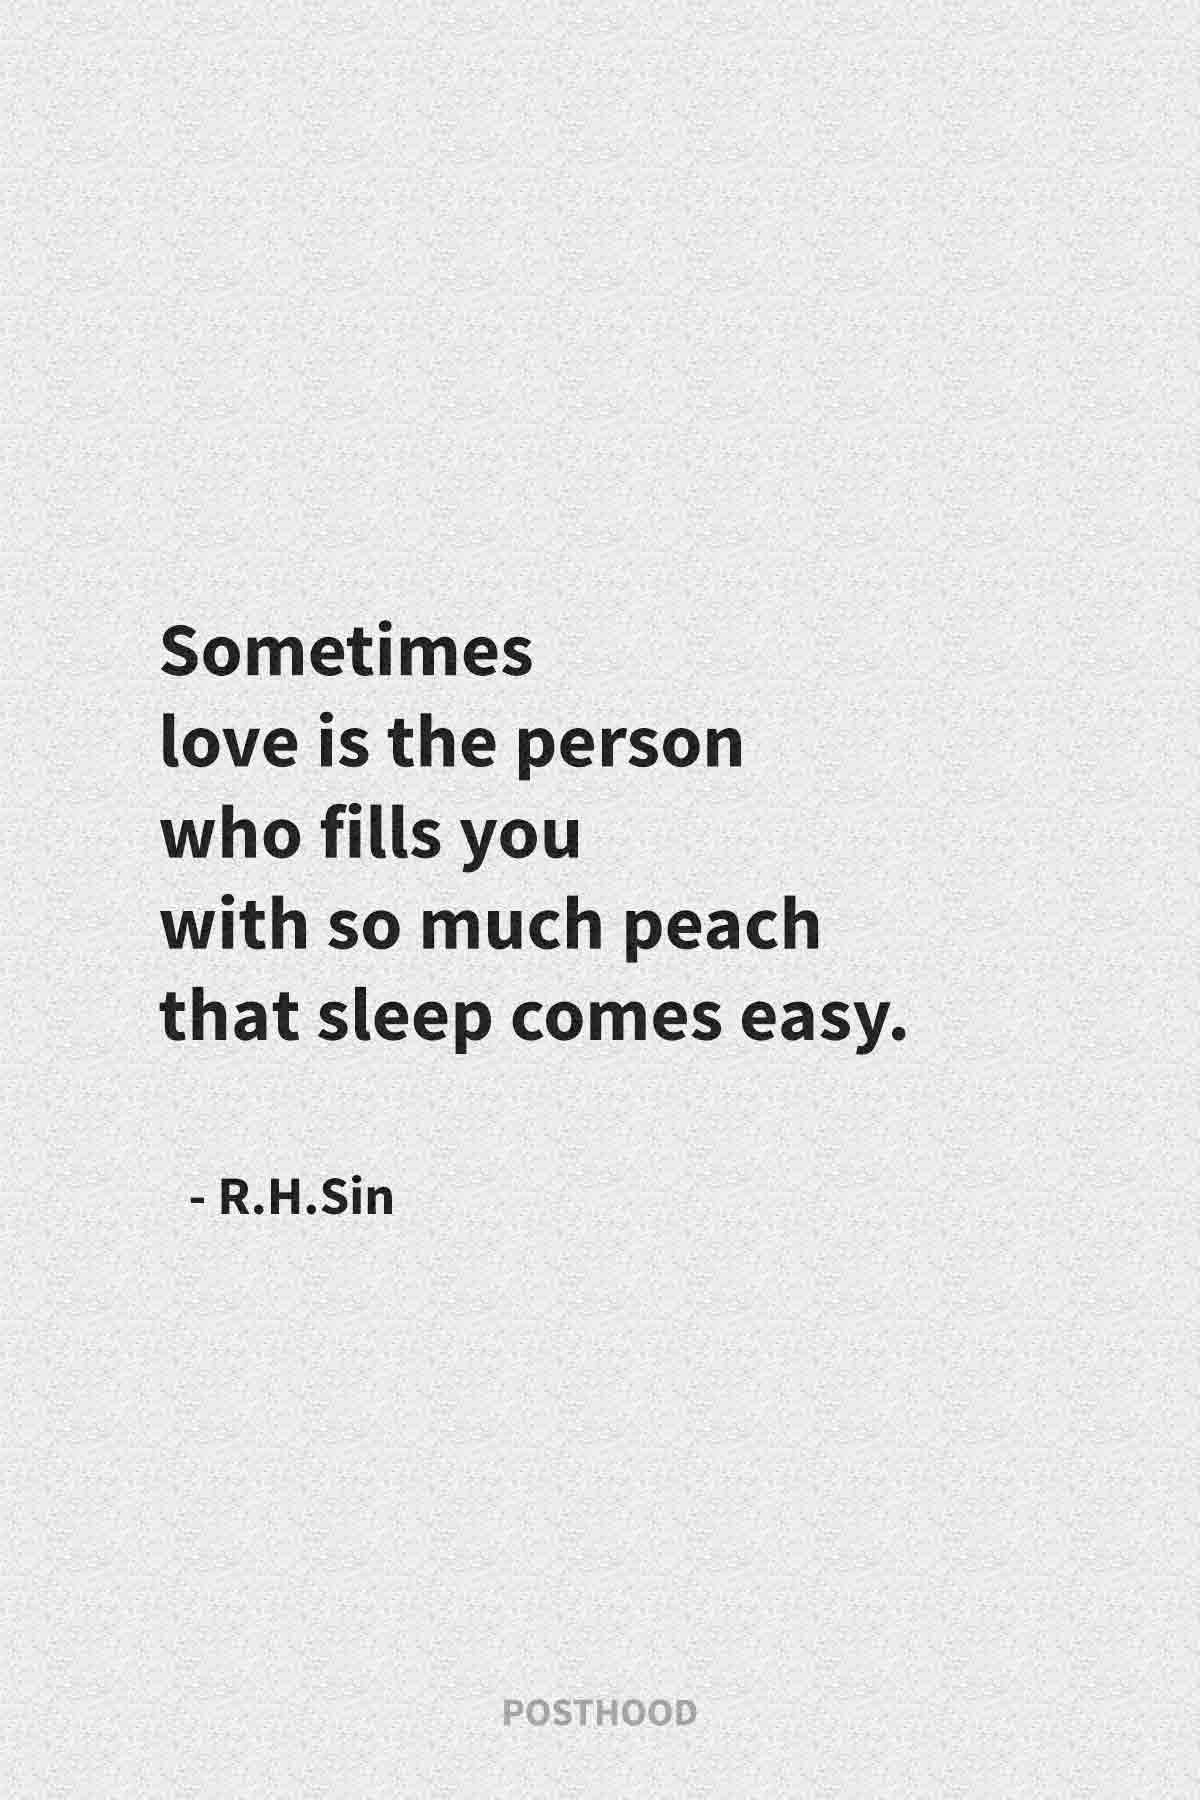 40 quotes to realize you the difference between real love and fake love. Get inspiration from R.H.sin's poetry and powerful quotes about love and relationship. 